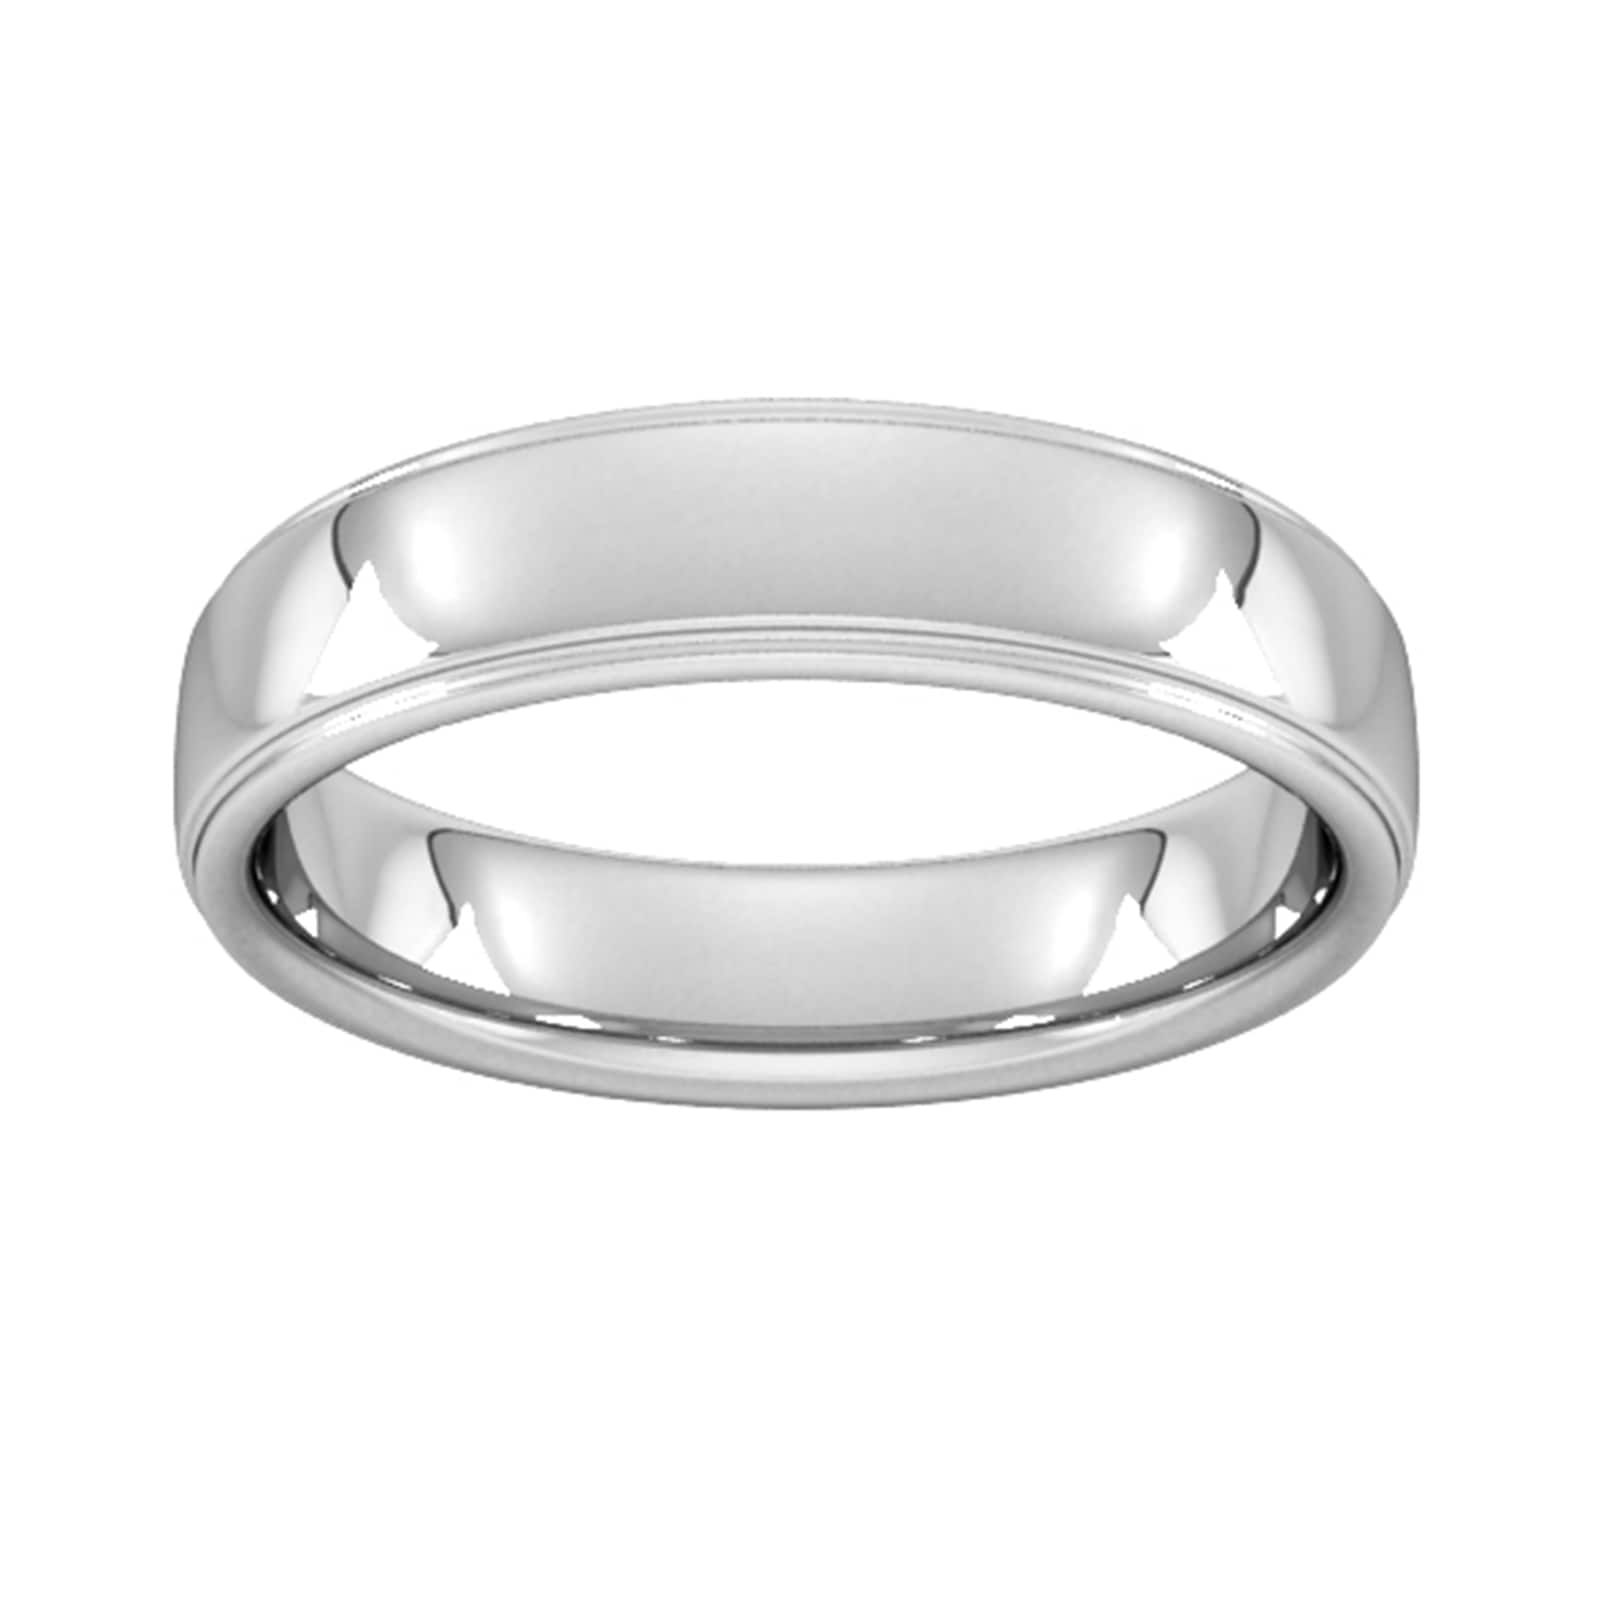 5mm Slight Court Standard Polished Finish With Grooves Wedding Ring In Platinum - Ring Size O